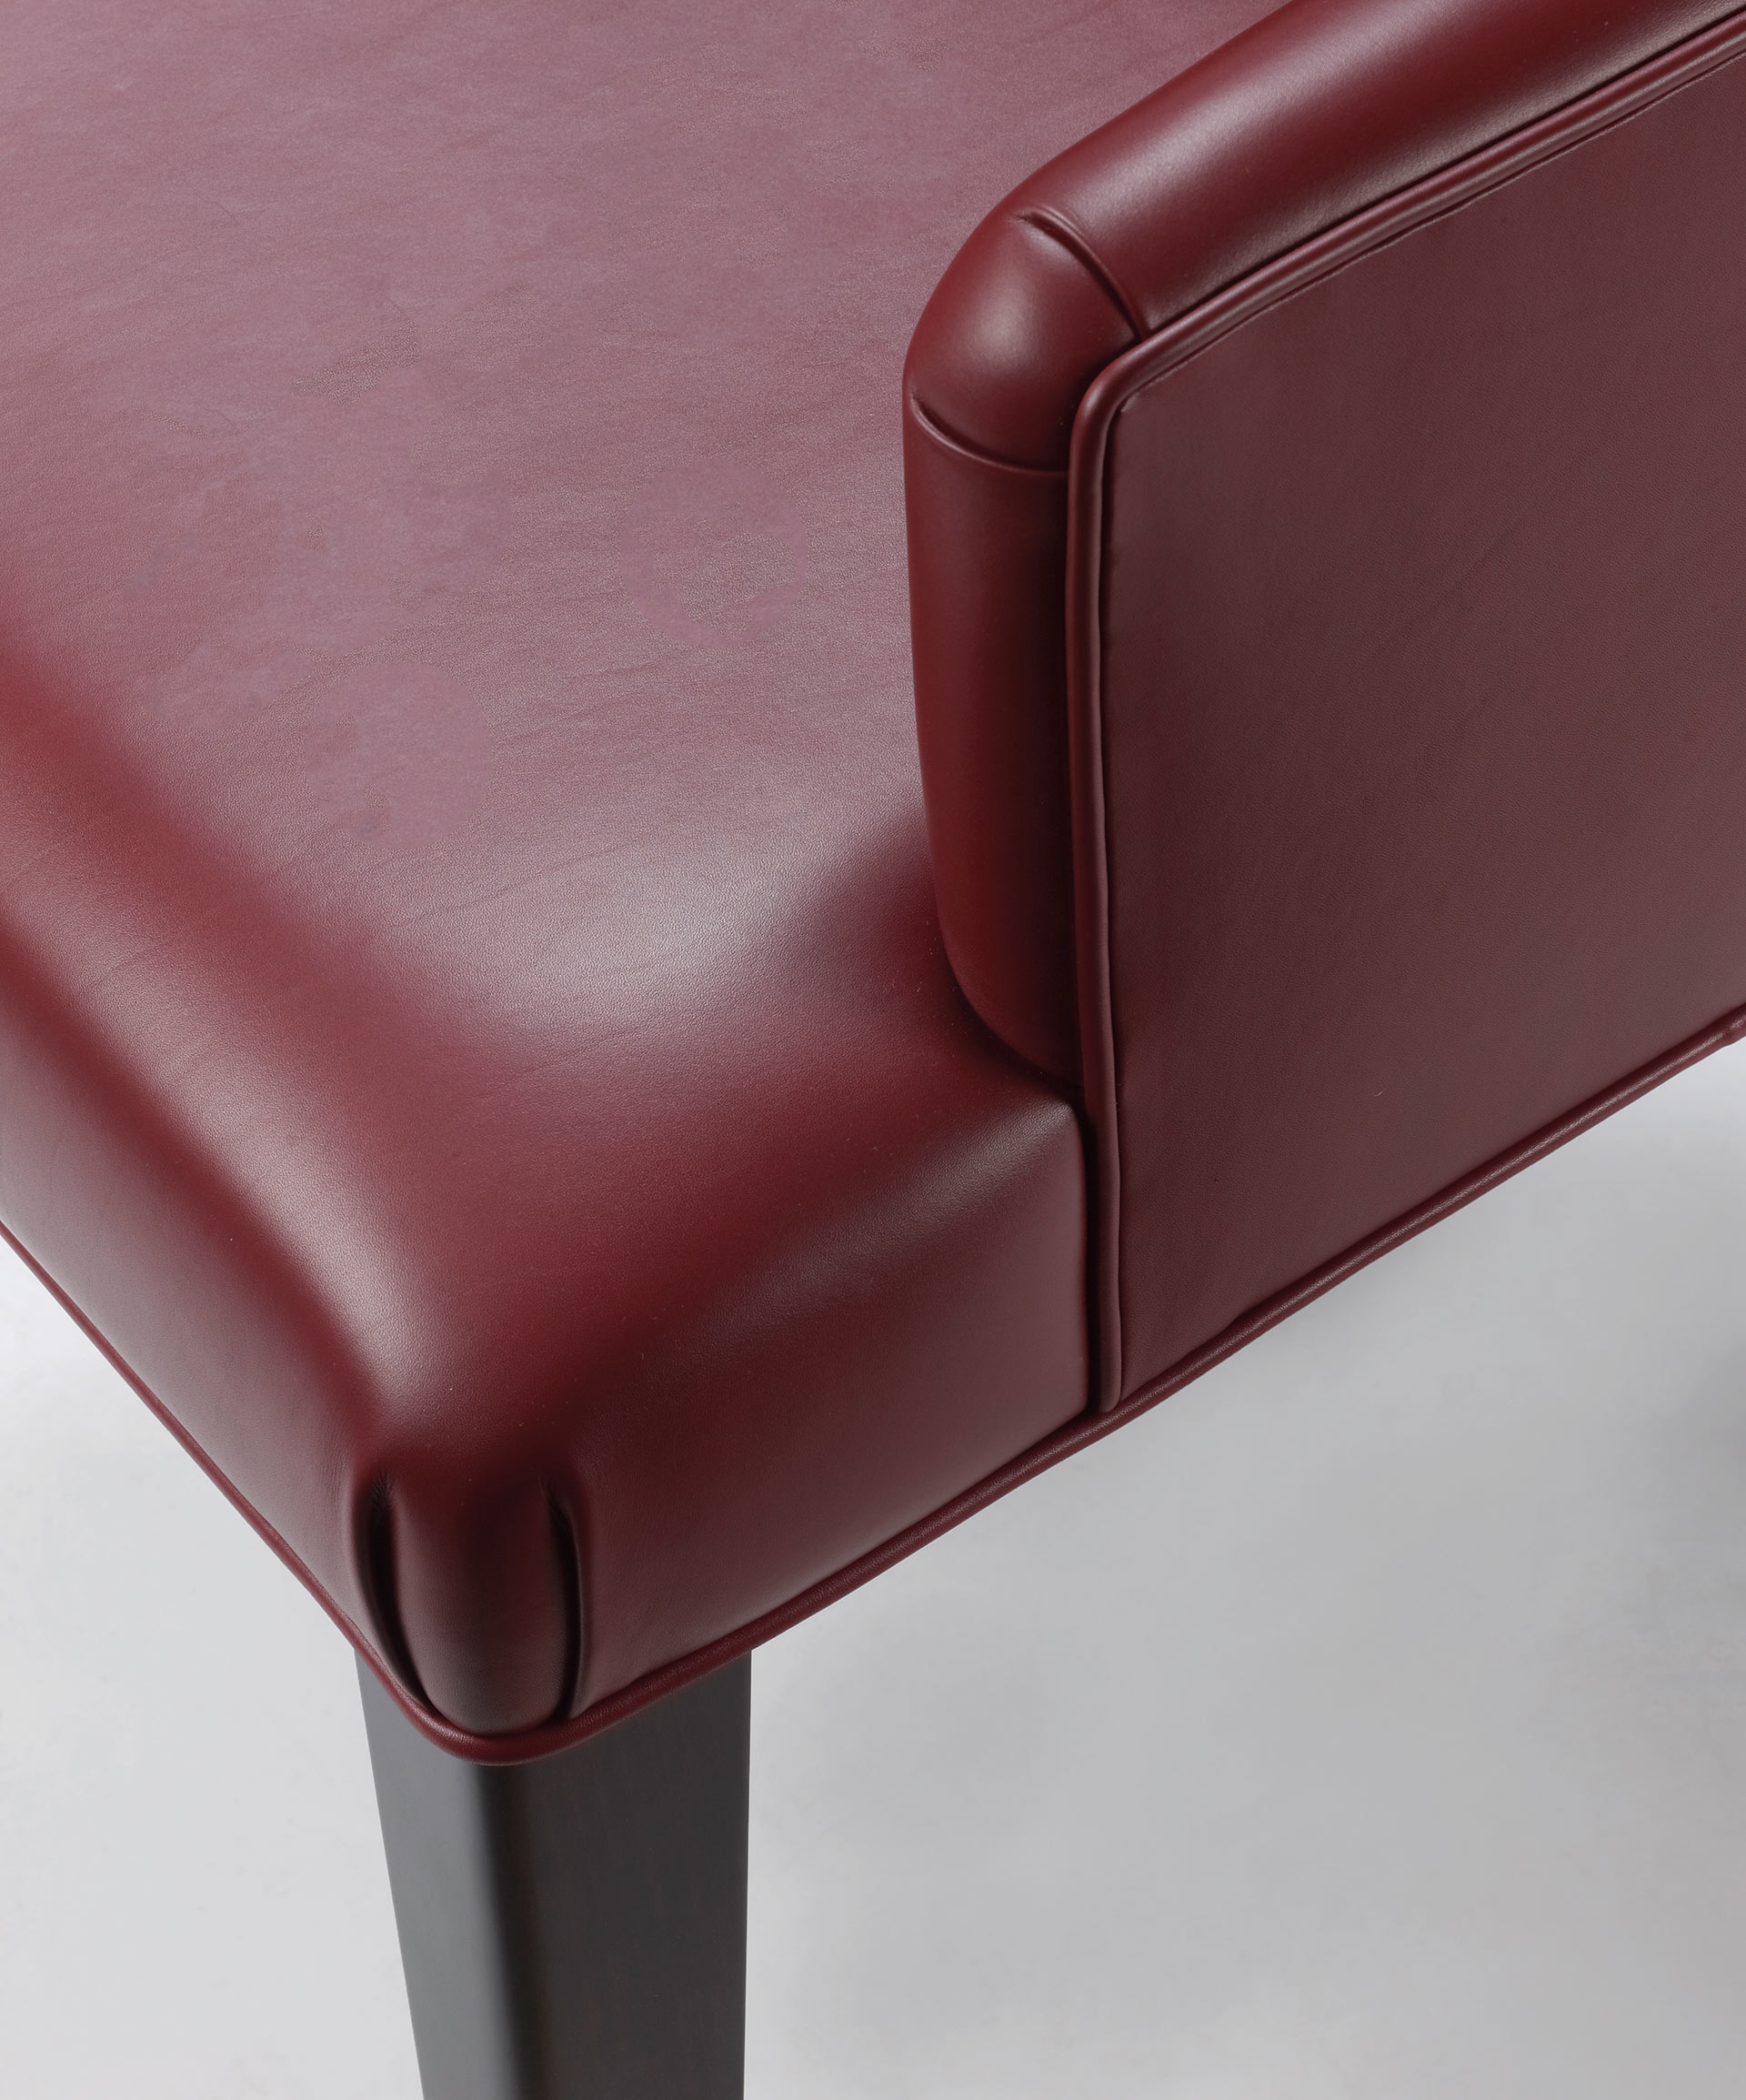 Detail of the bronze handle on the back of Isotta, a wooden dining chair with or without armrests and with a fabric or leather covered back, from Promemoria's catalogue | Promemoria